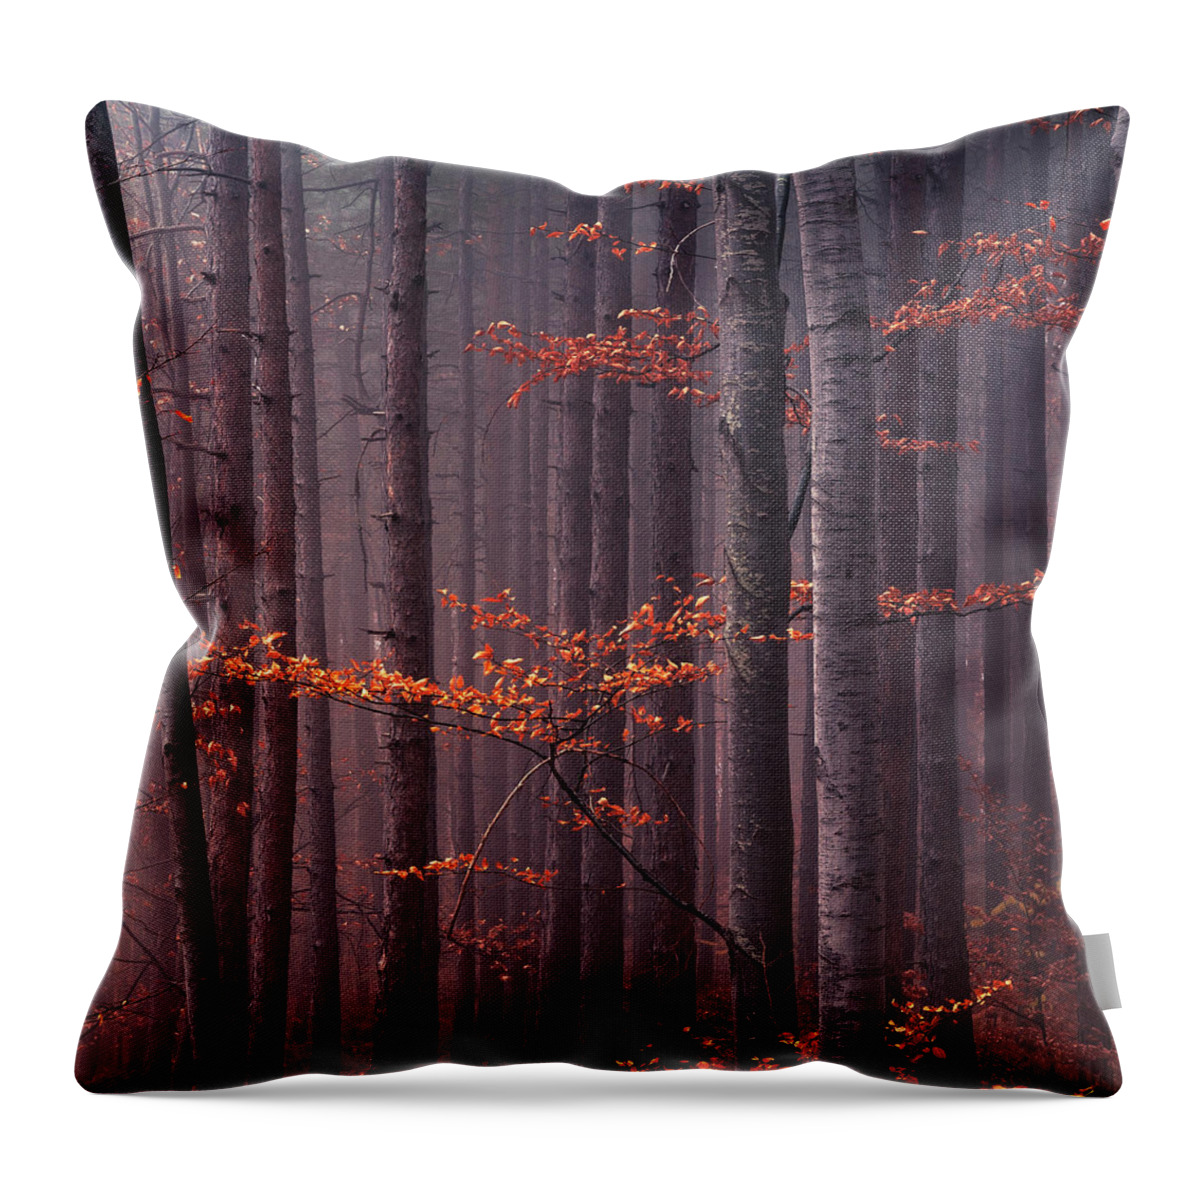 Mountain Throw Pillow featuring the photograph Red Wood by Evgeni Dinev